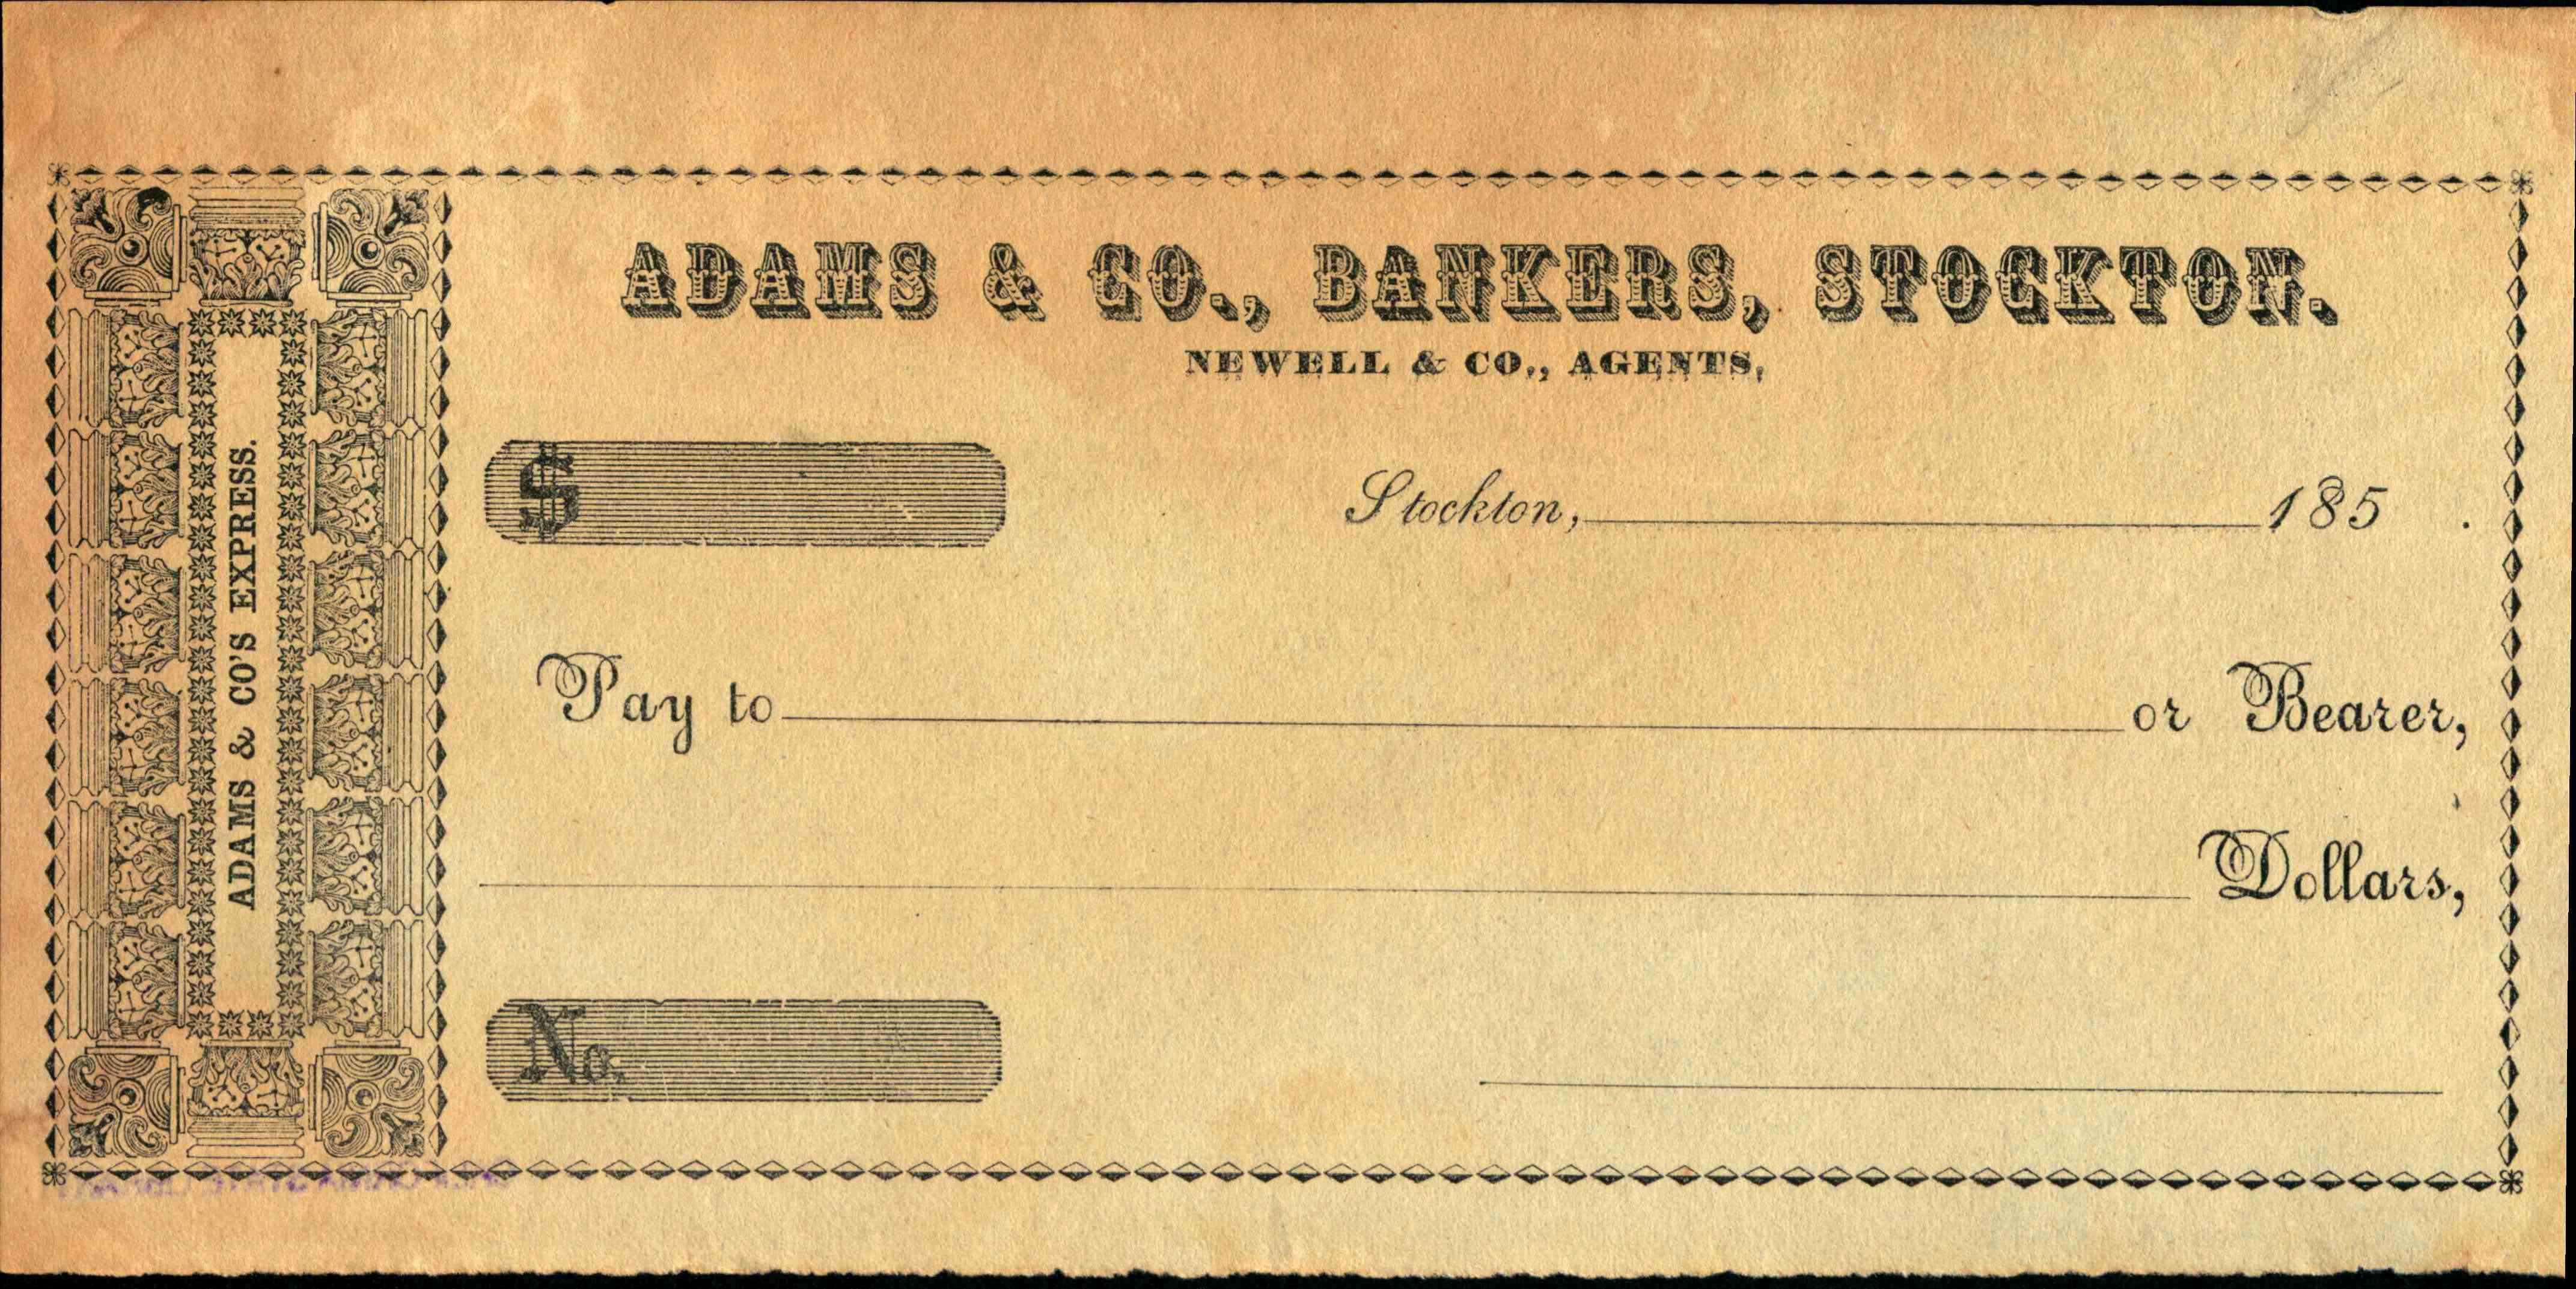 Design with Adams & co's express logo on the left hand side of receipt